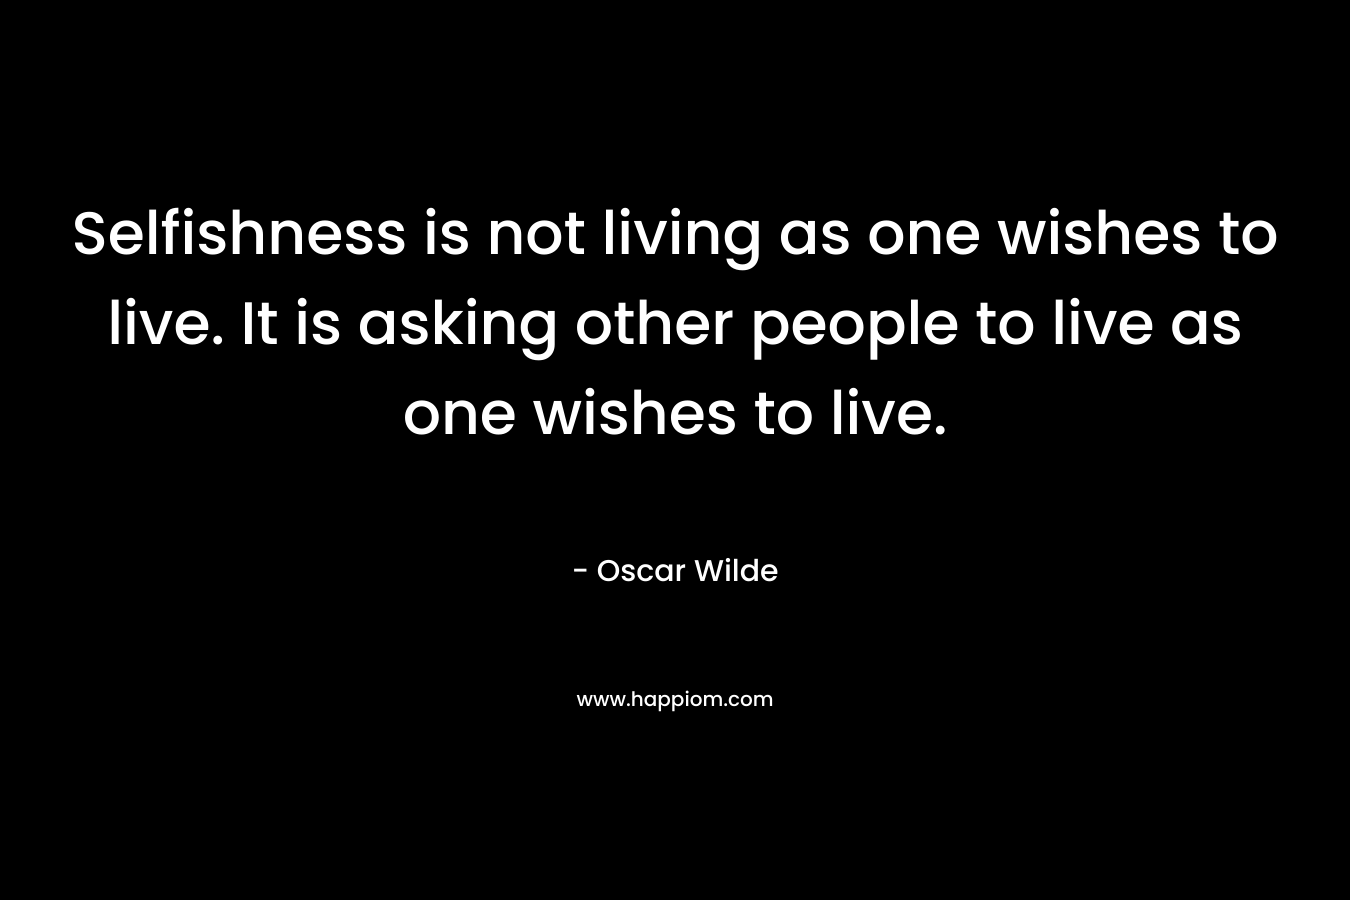 Selfishness is not living as one wishes to live. It is asking other people to live as one wishes to live. – Oscar Wilde